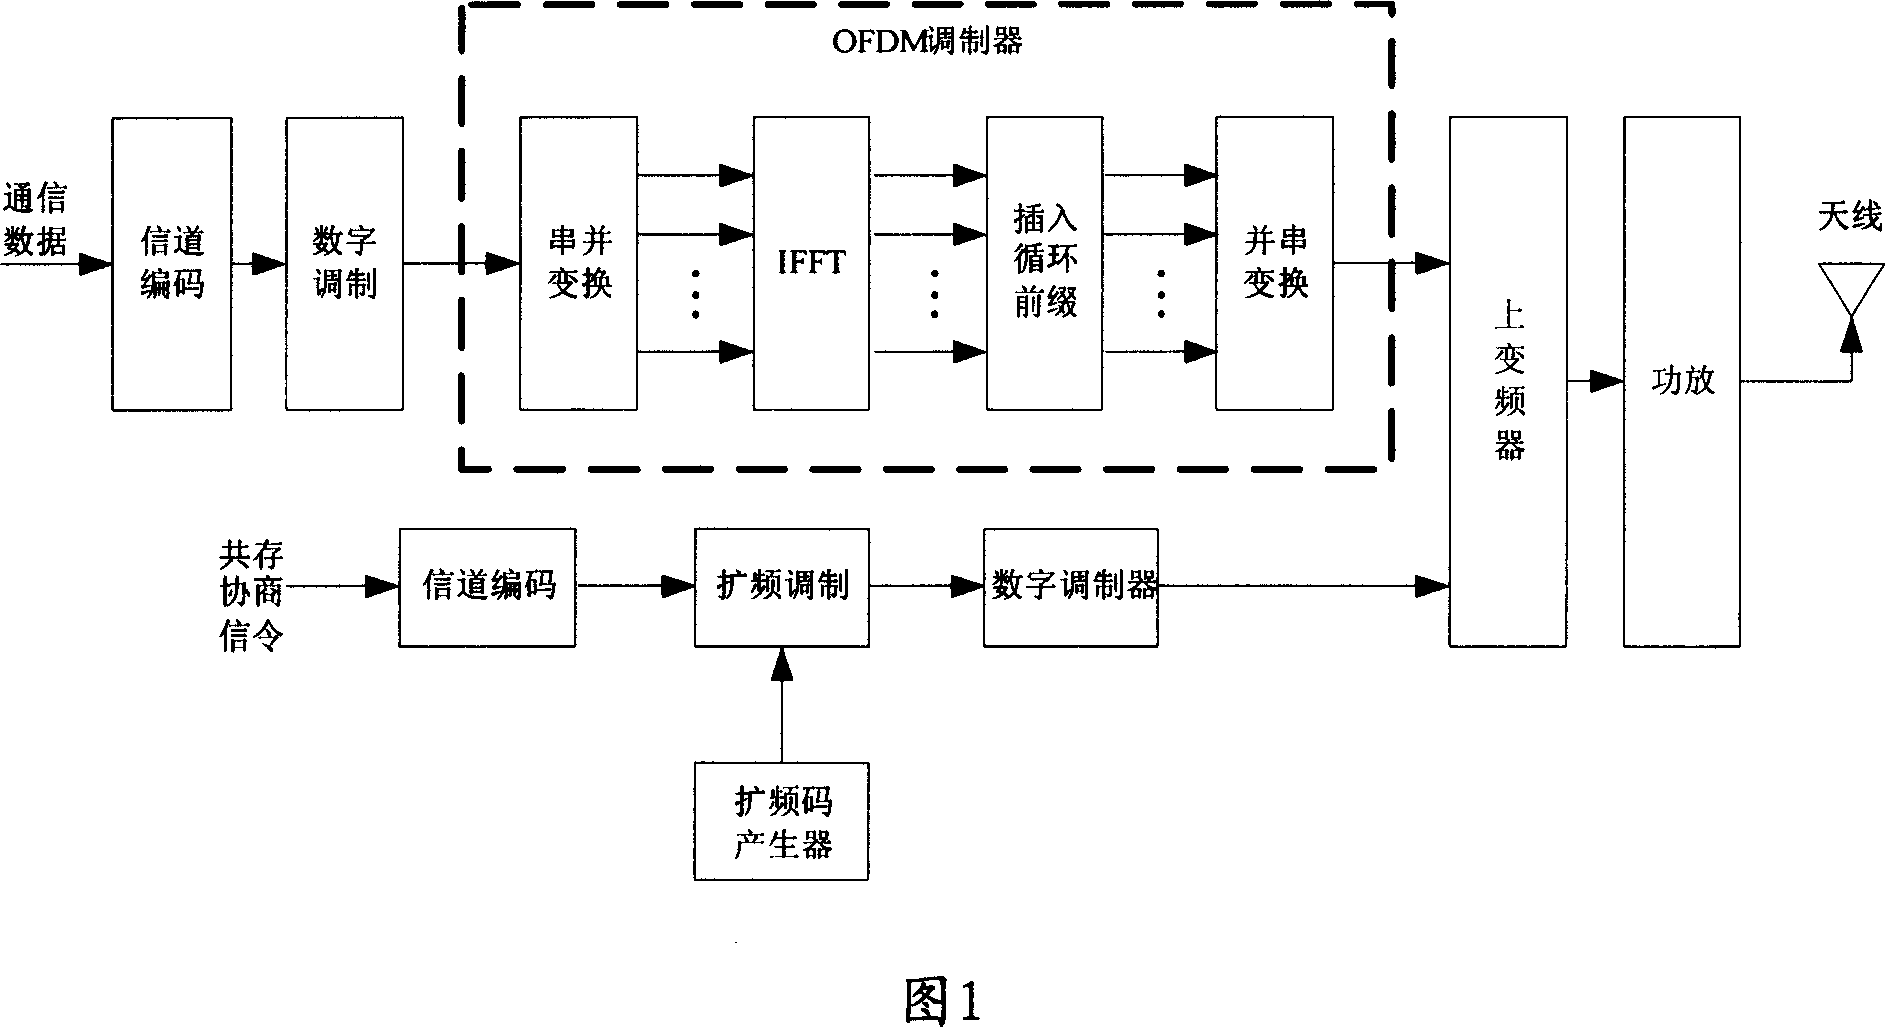 Spread spectrum orthogonal frequency division multiplexing mixing system